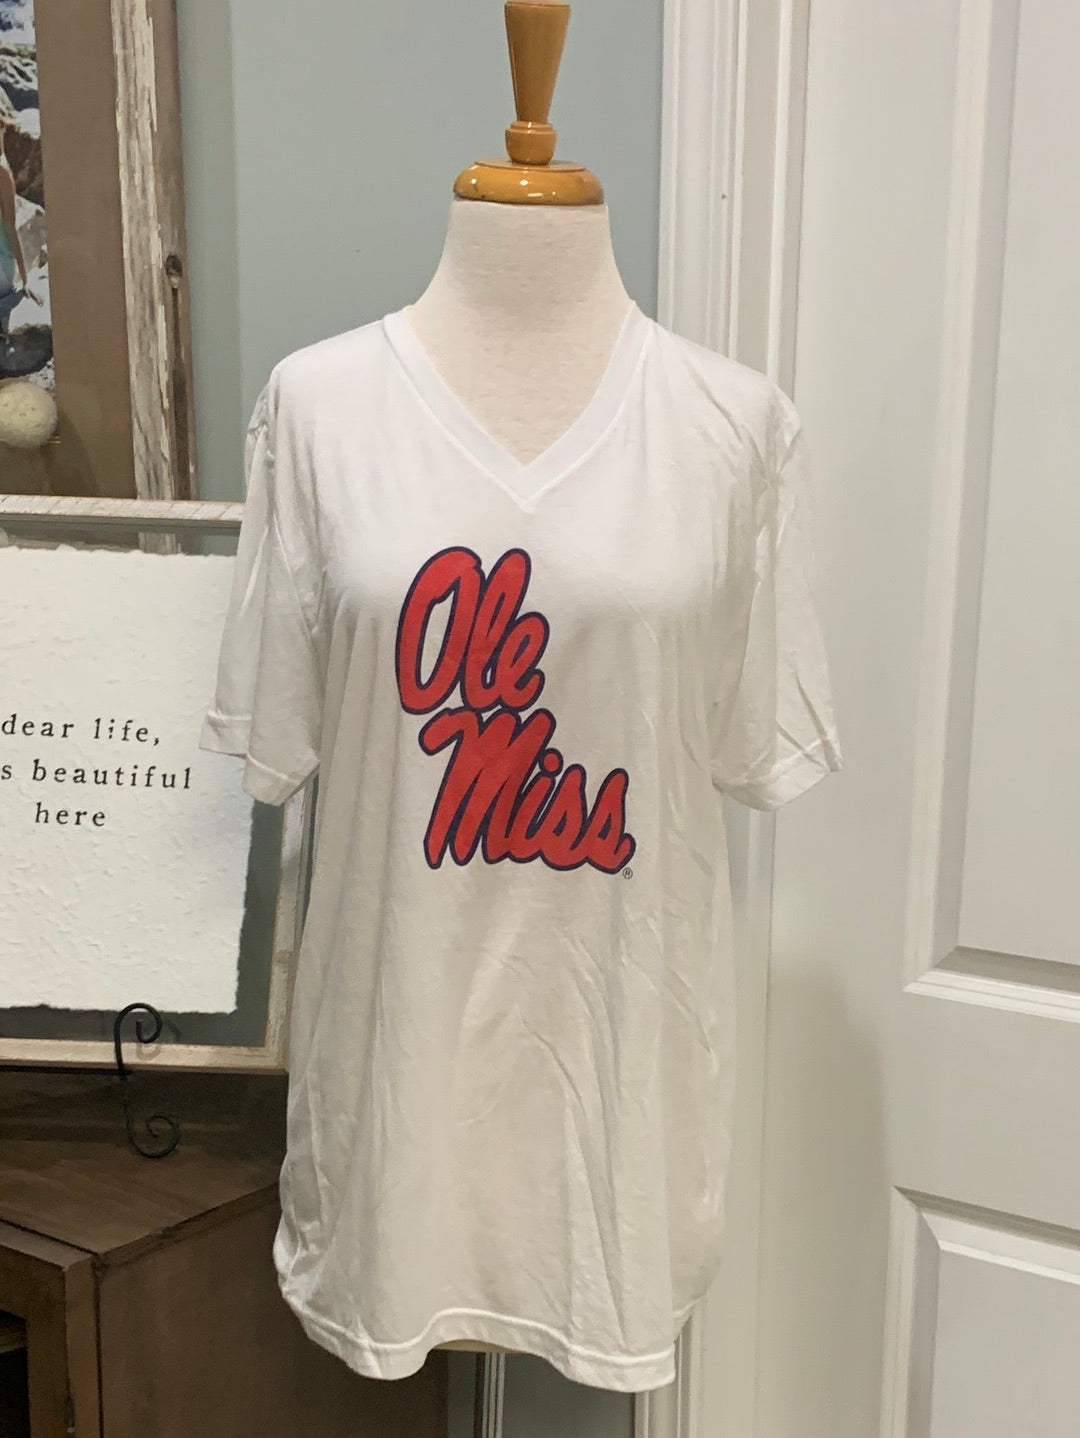 Womens Ole Miss Tshirt Size Large MARKDOWN